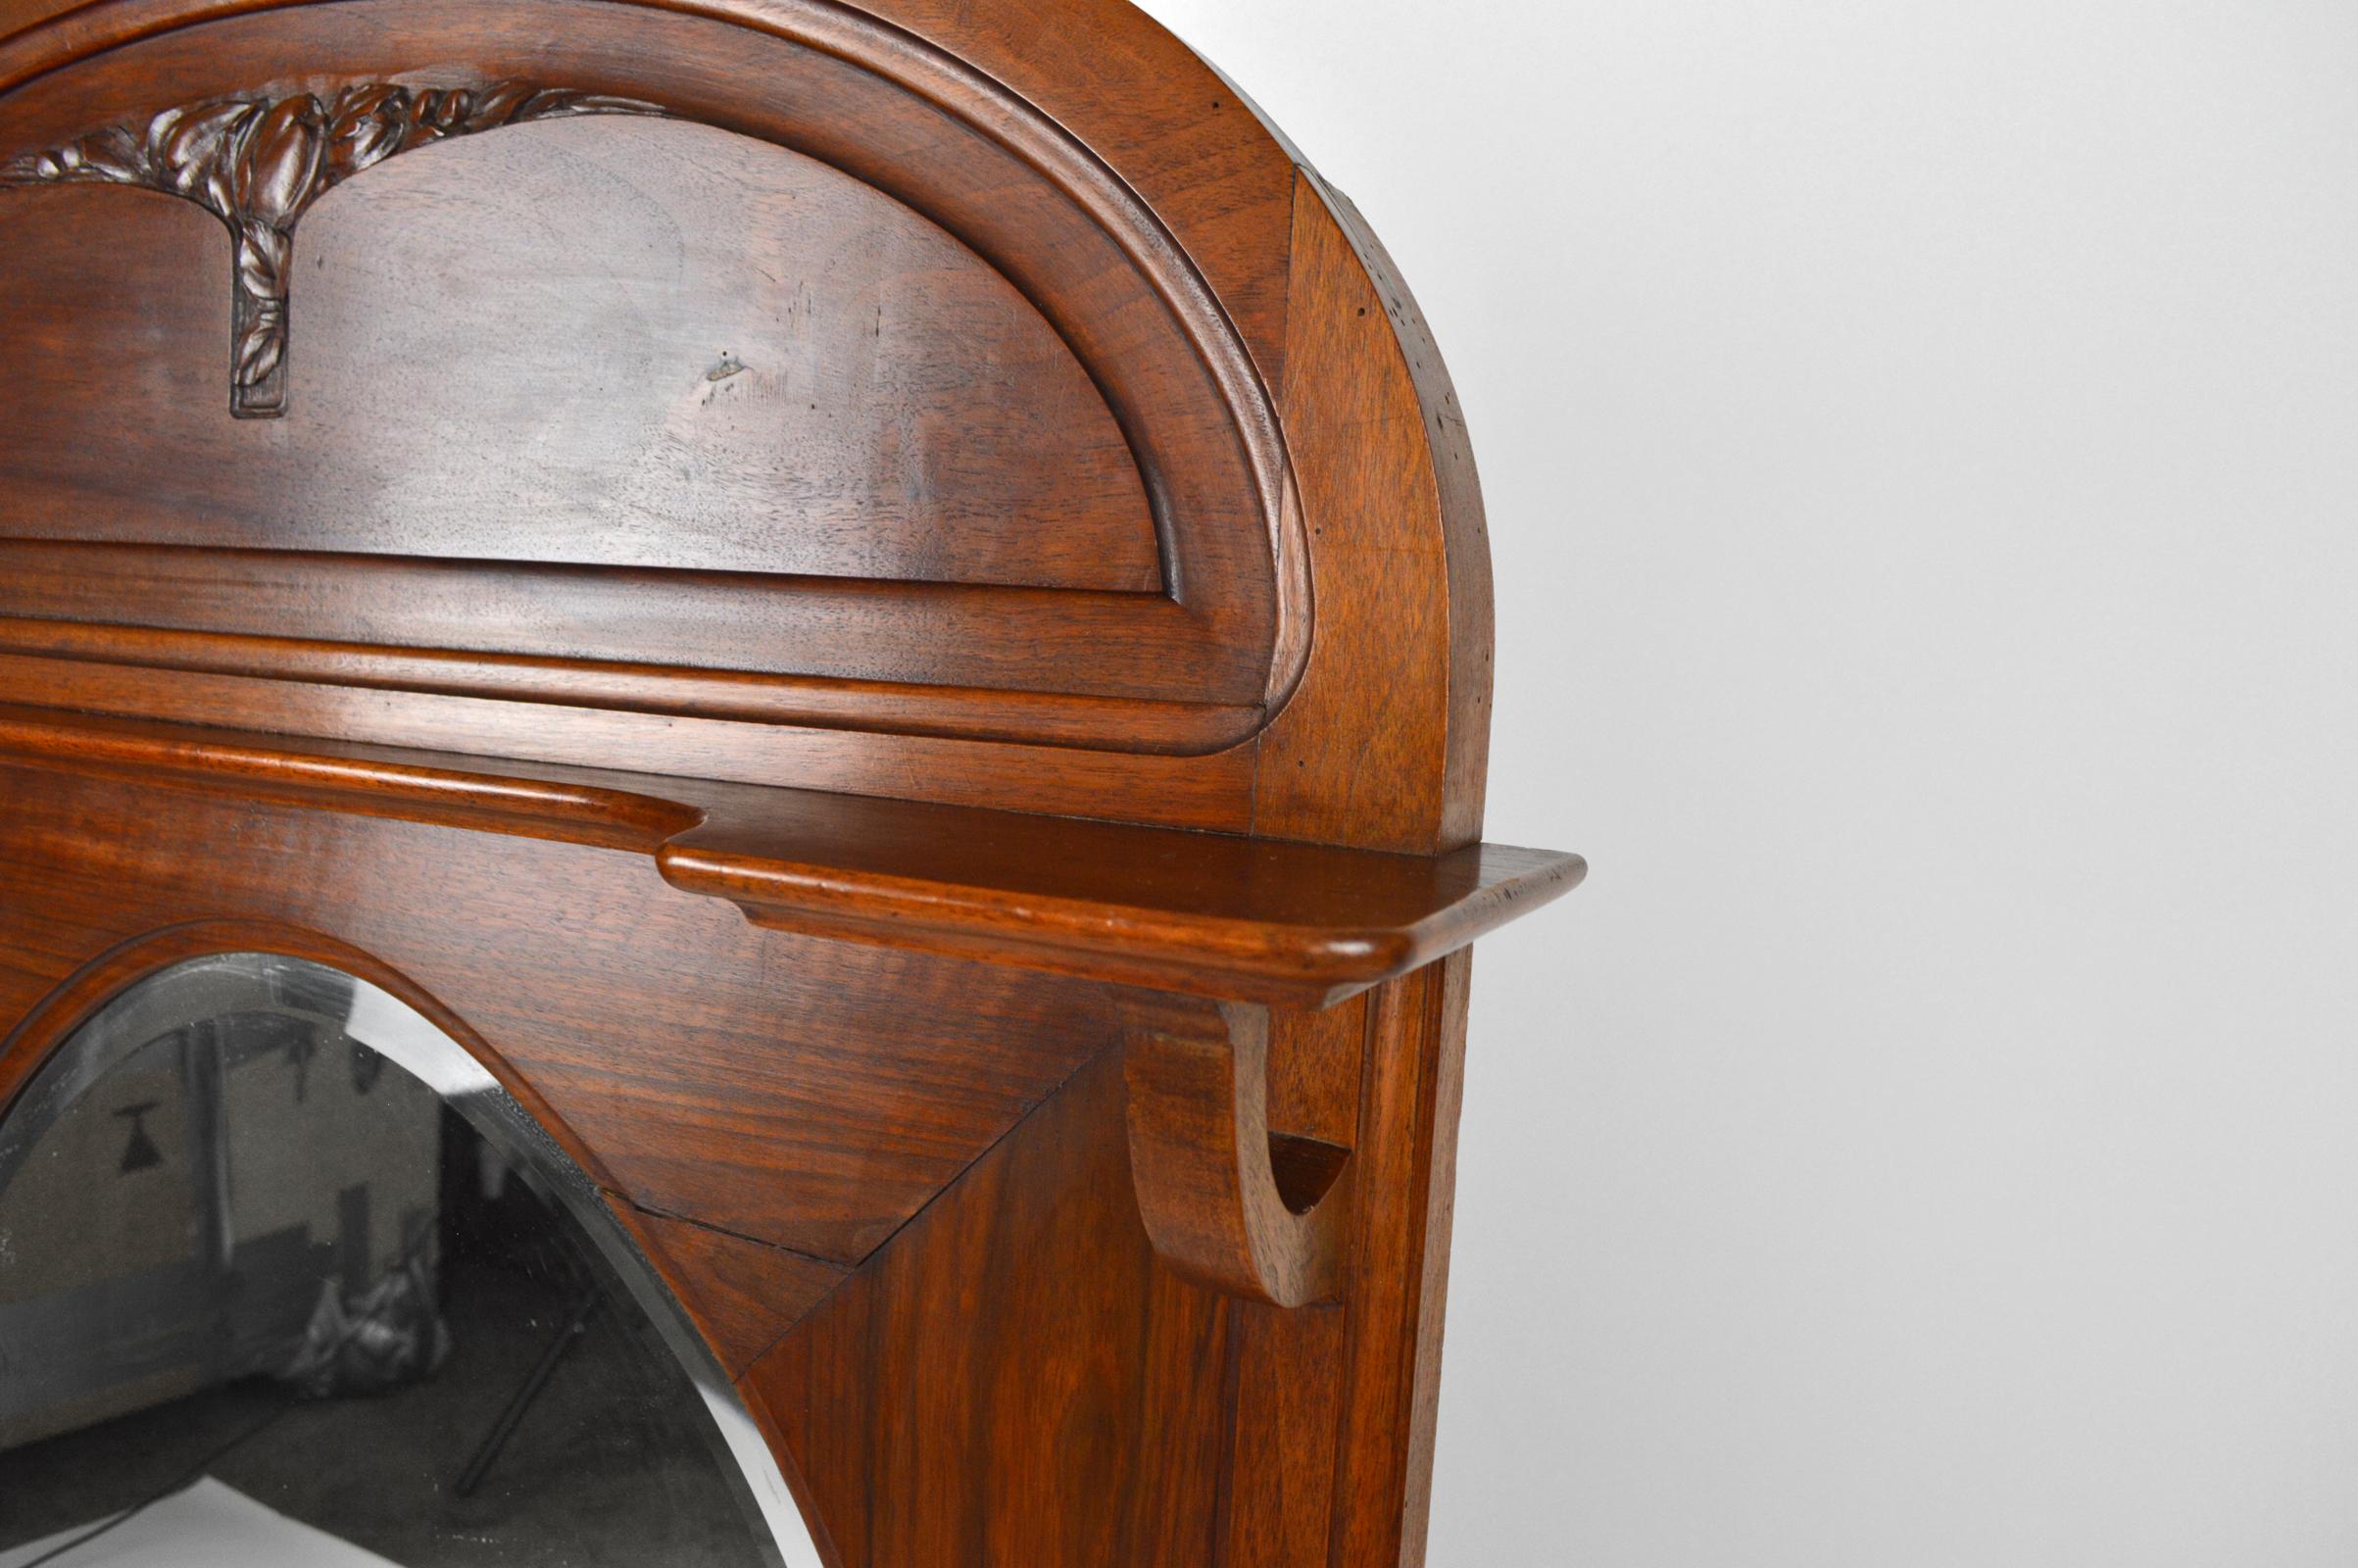 Oval Art Nouveau Fireplace Mirror in Carved Walnut, France, circa 1910 For Sale 5